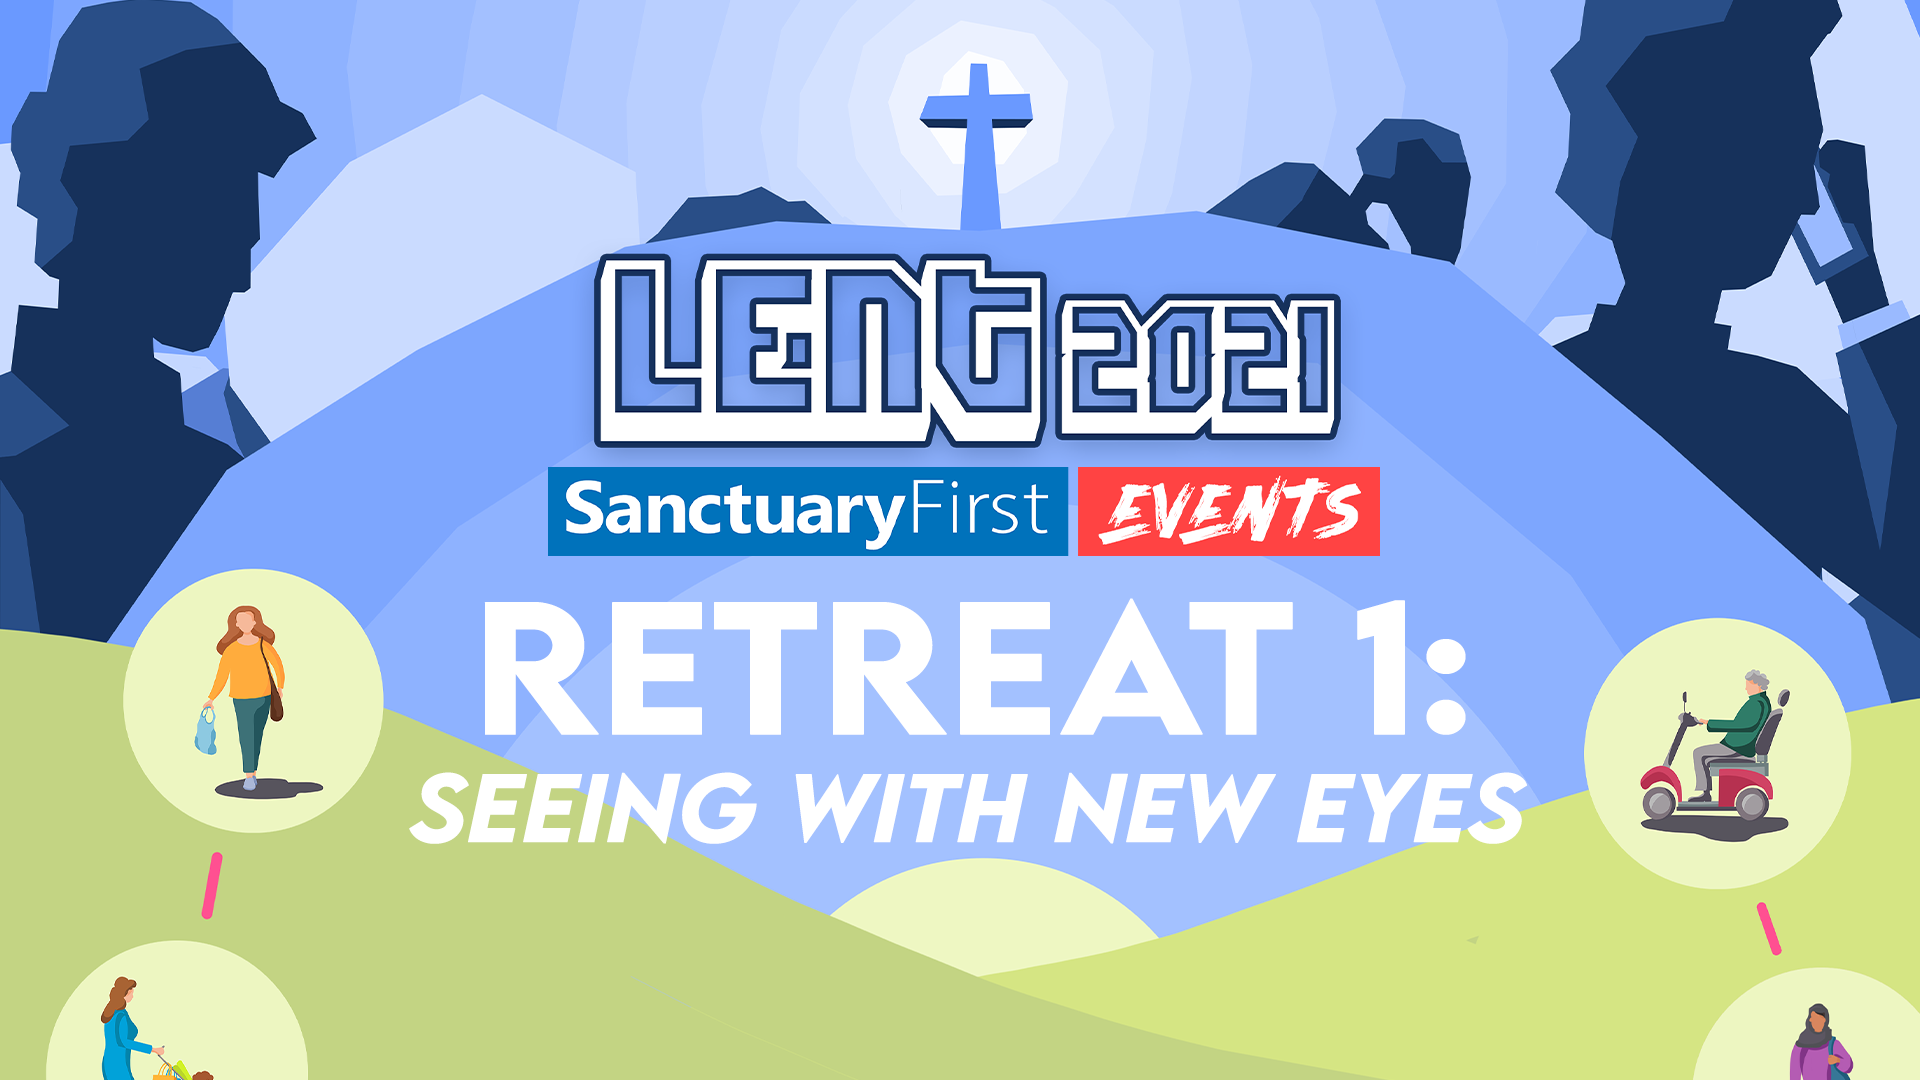 Retreat 1: Seeing with new eyes